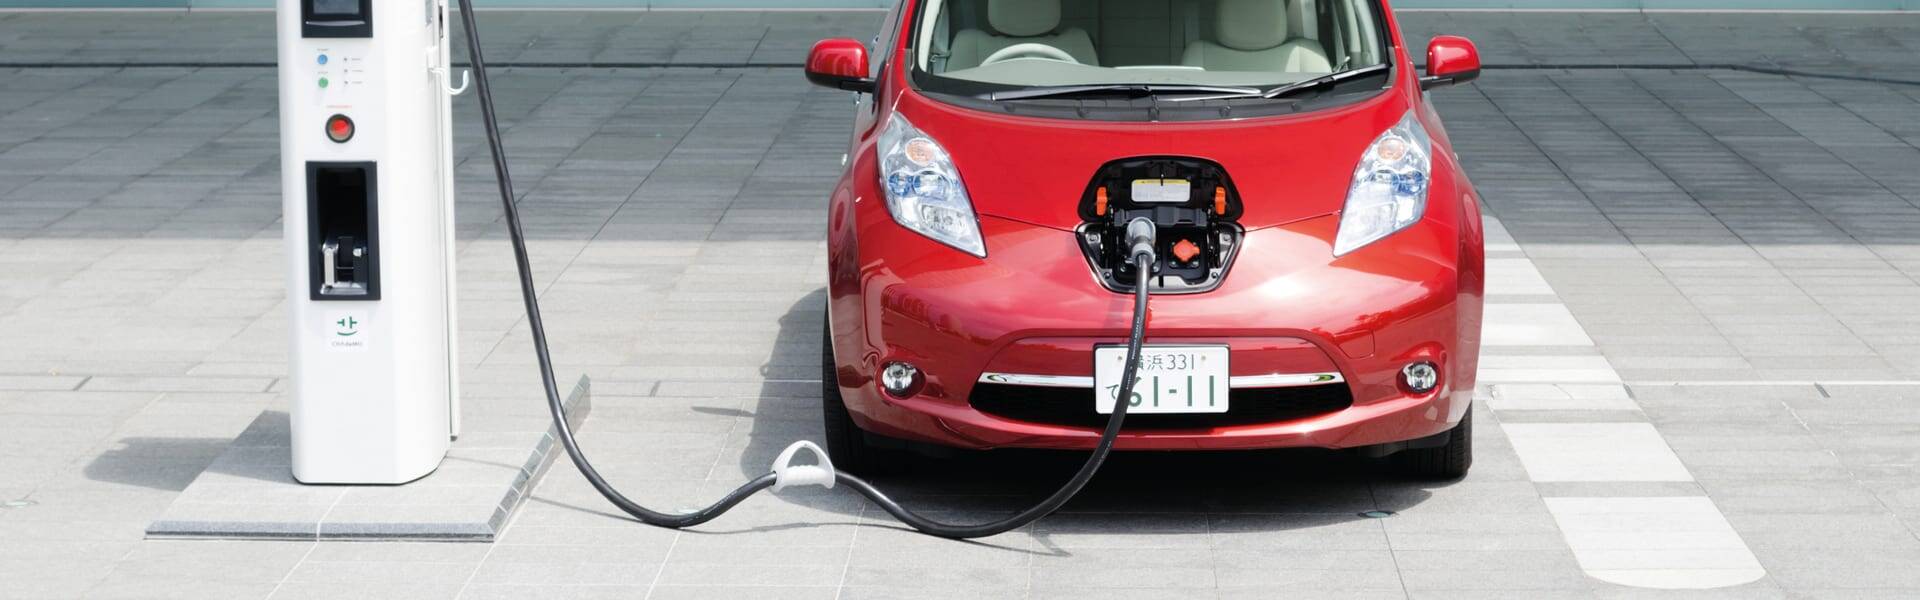 Councils lack funding needed to drive EV revolution